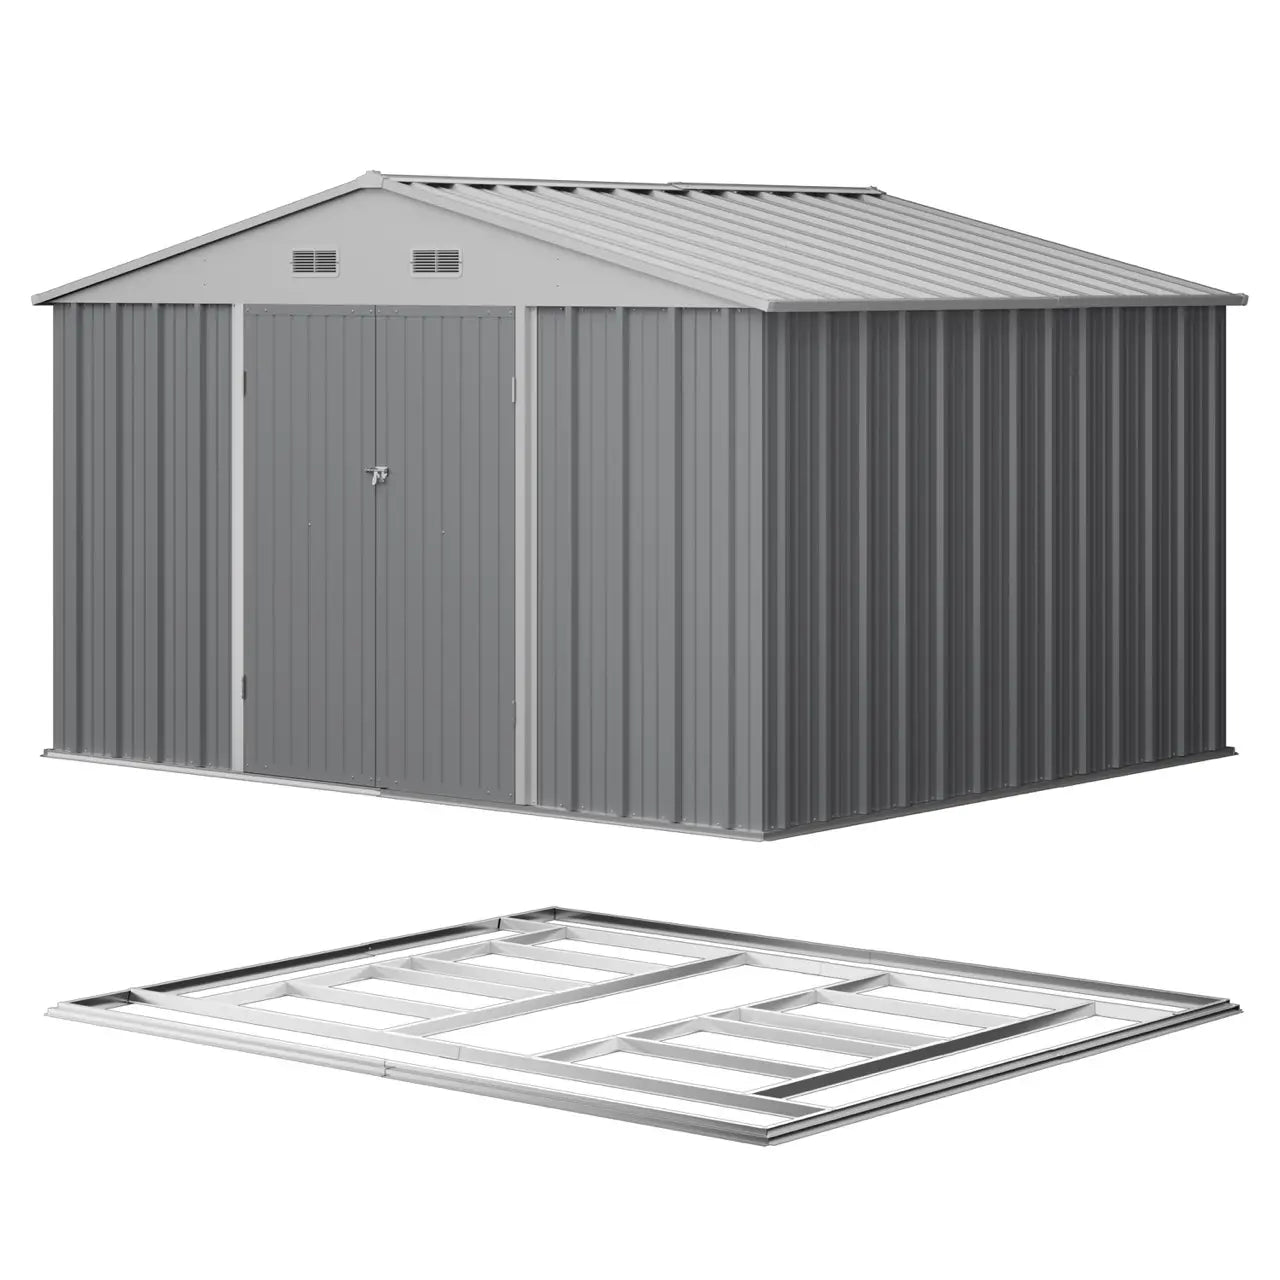 Patiowell 10x8 Metal Shed Pro With An Optional Floor Base